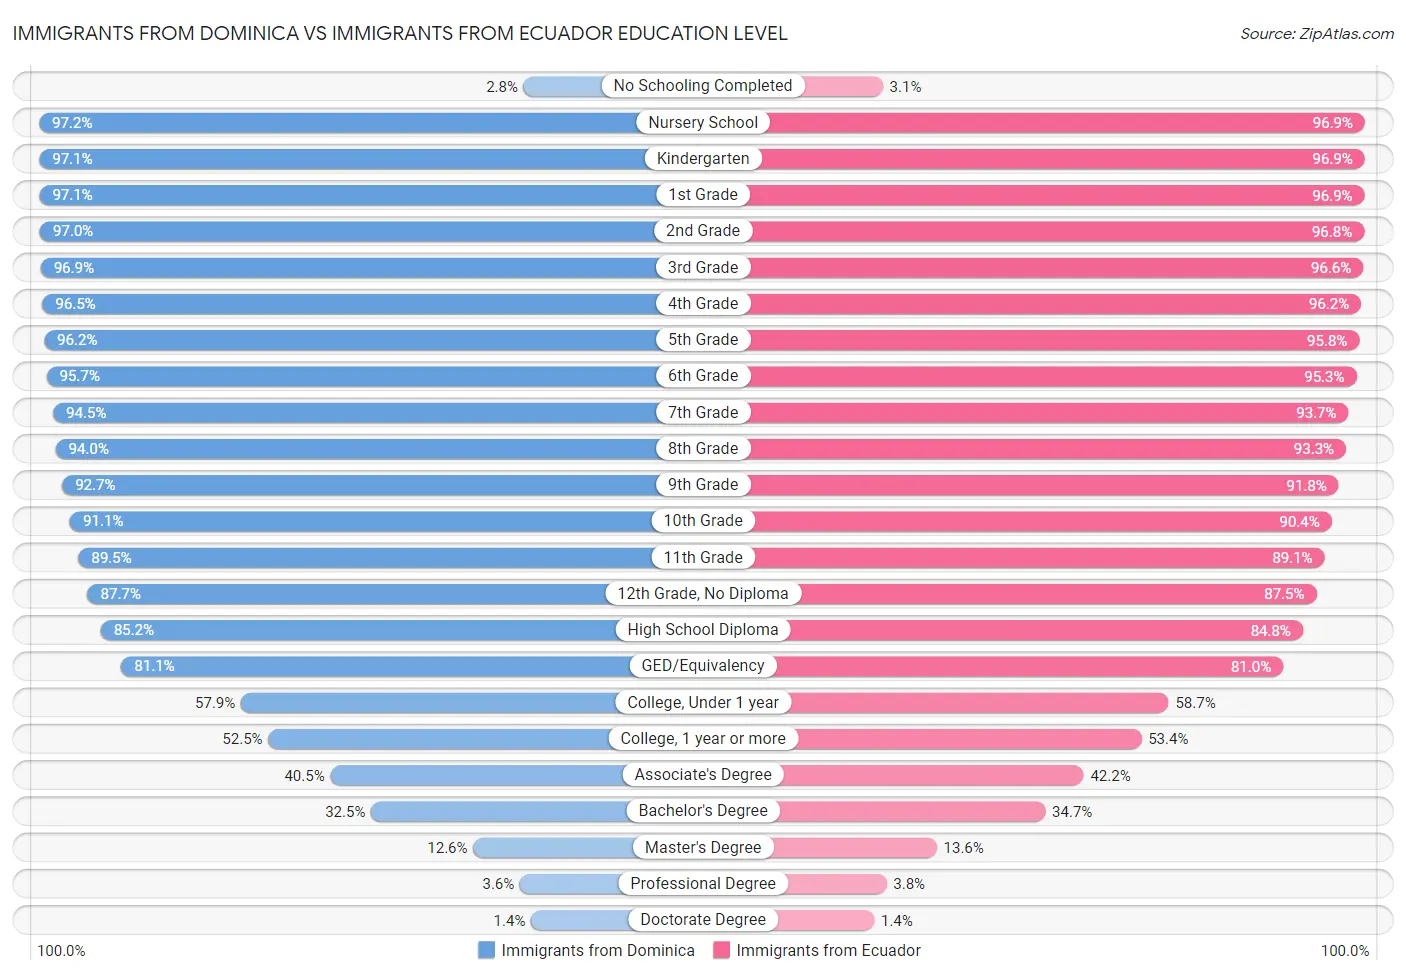 Immigrants from Dominica vs Immigrants from Ecuador Education Level